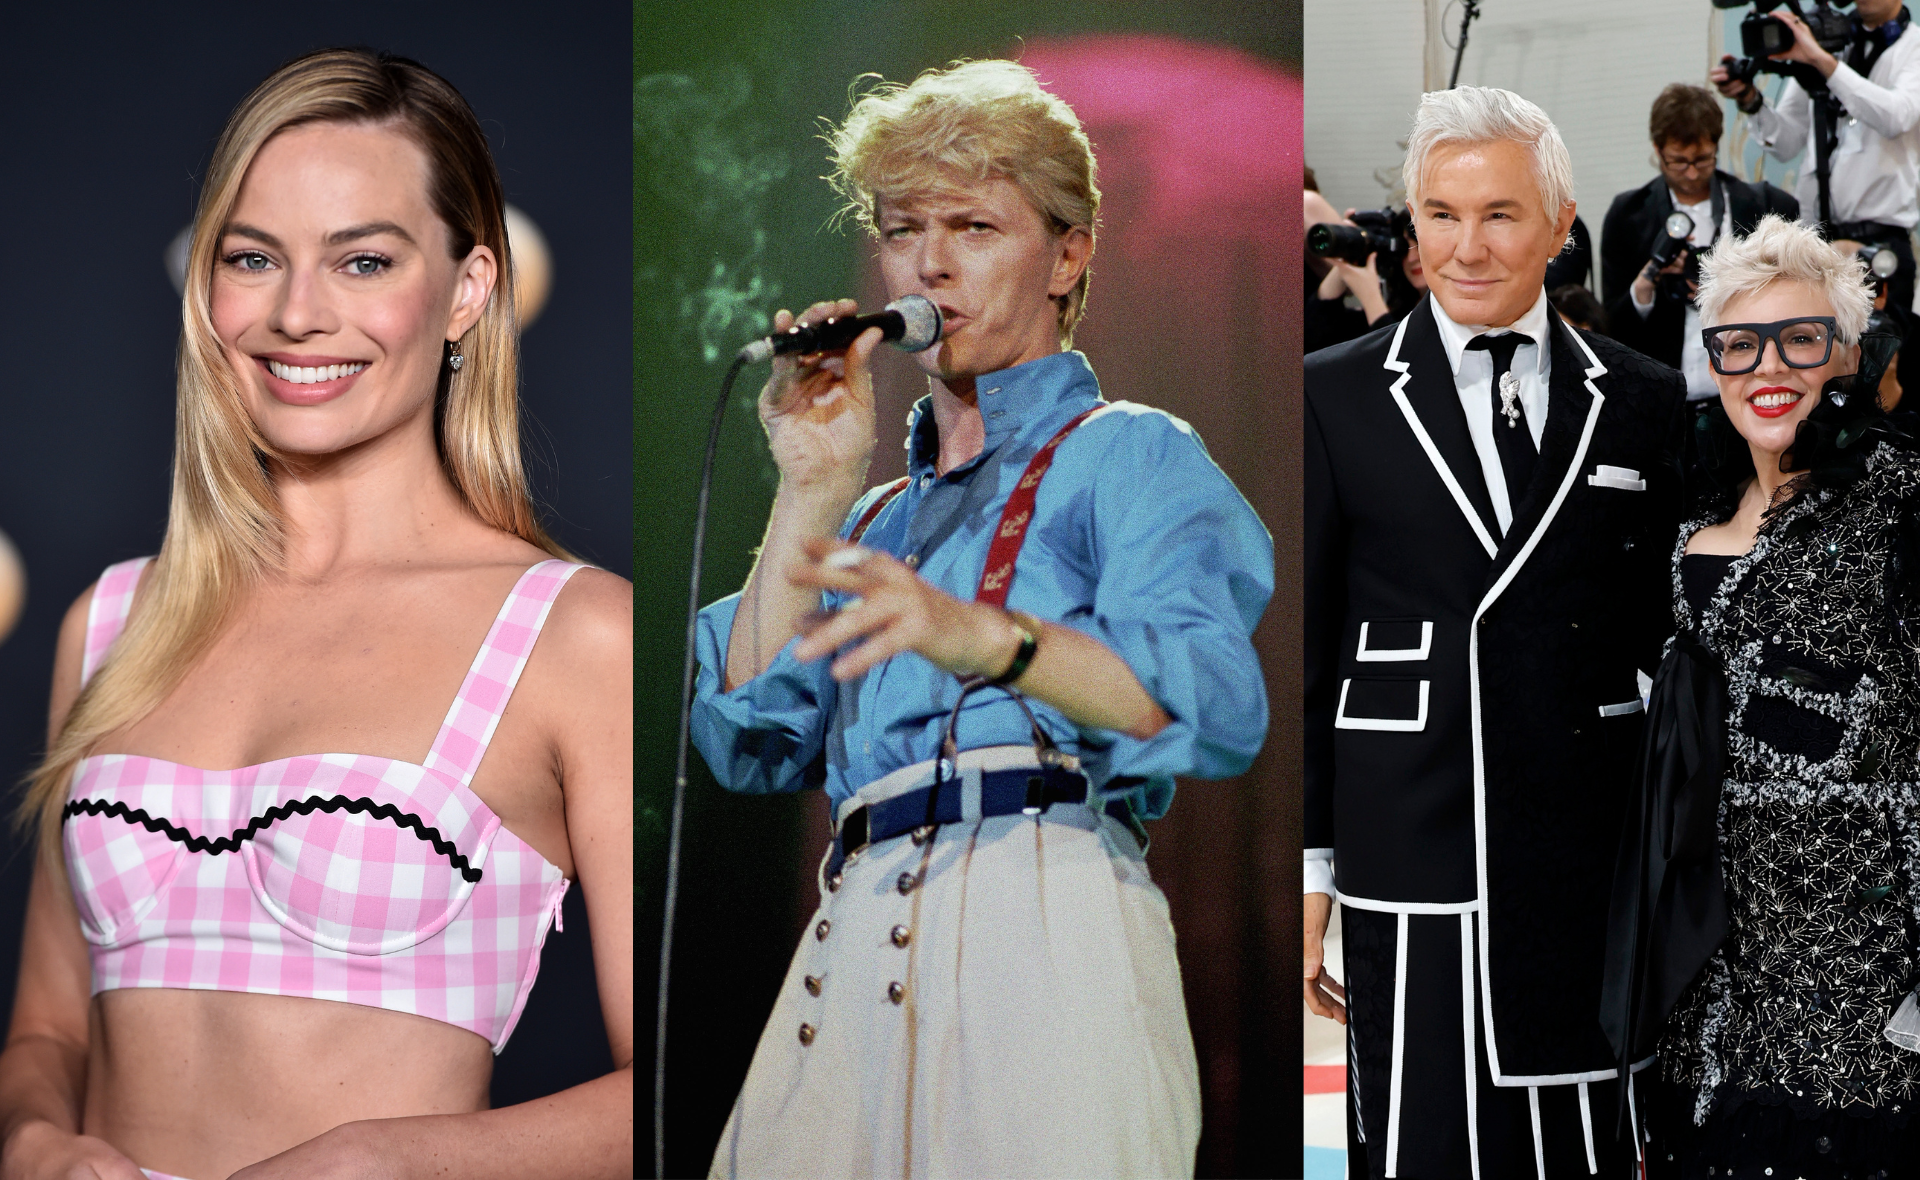 From Hollywood to Down Under: 11 celebrities that have called Australia home